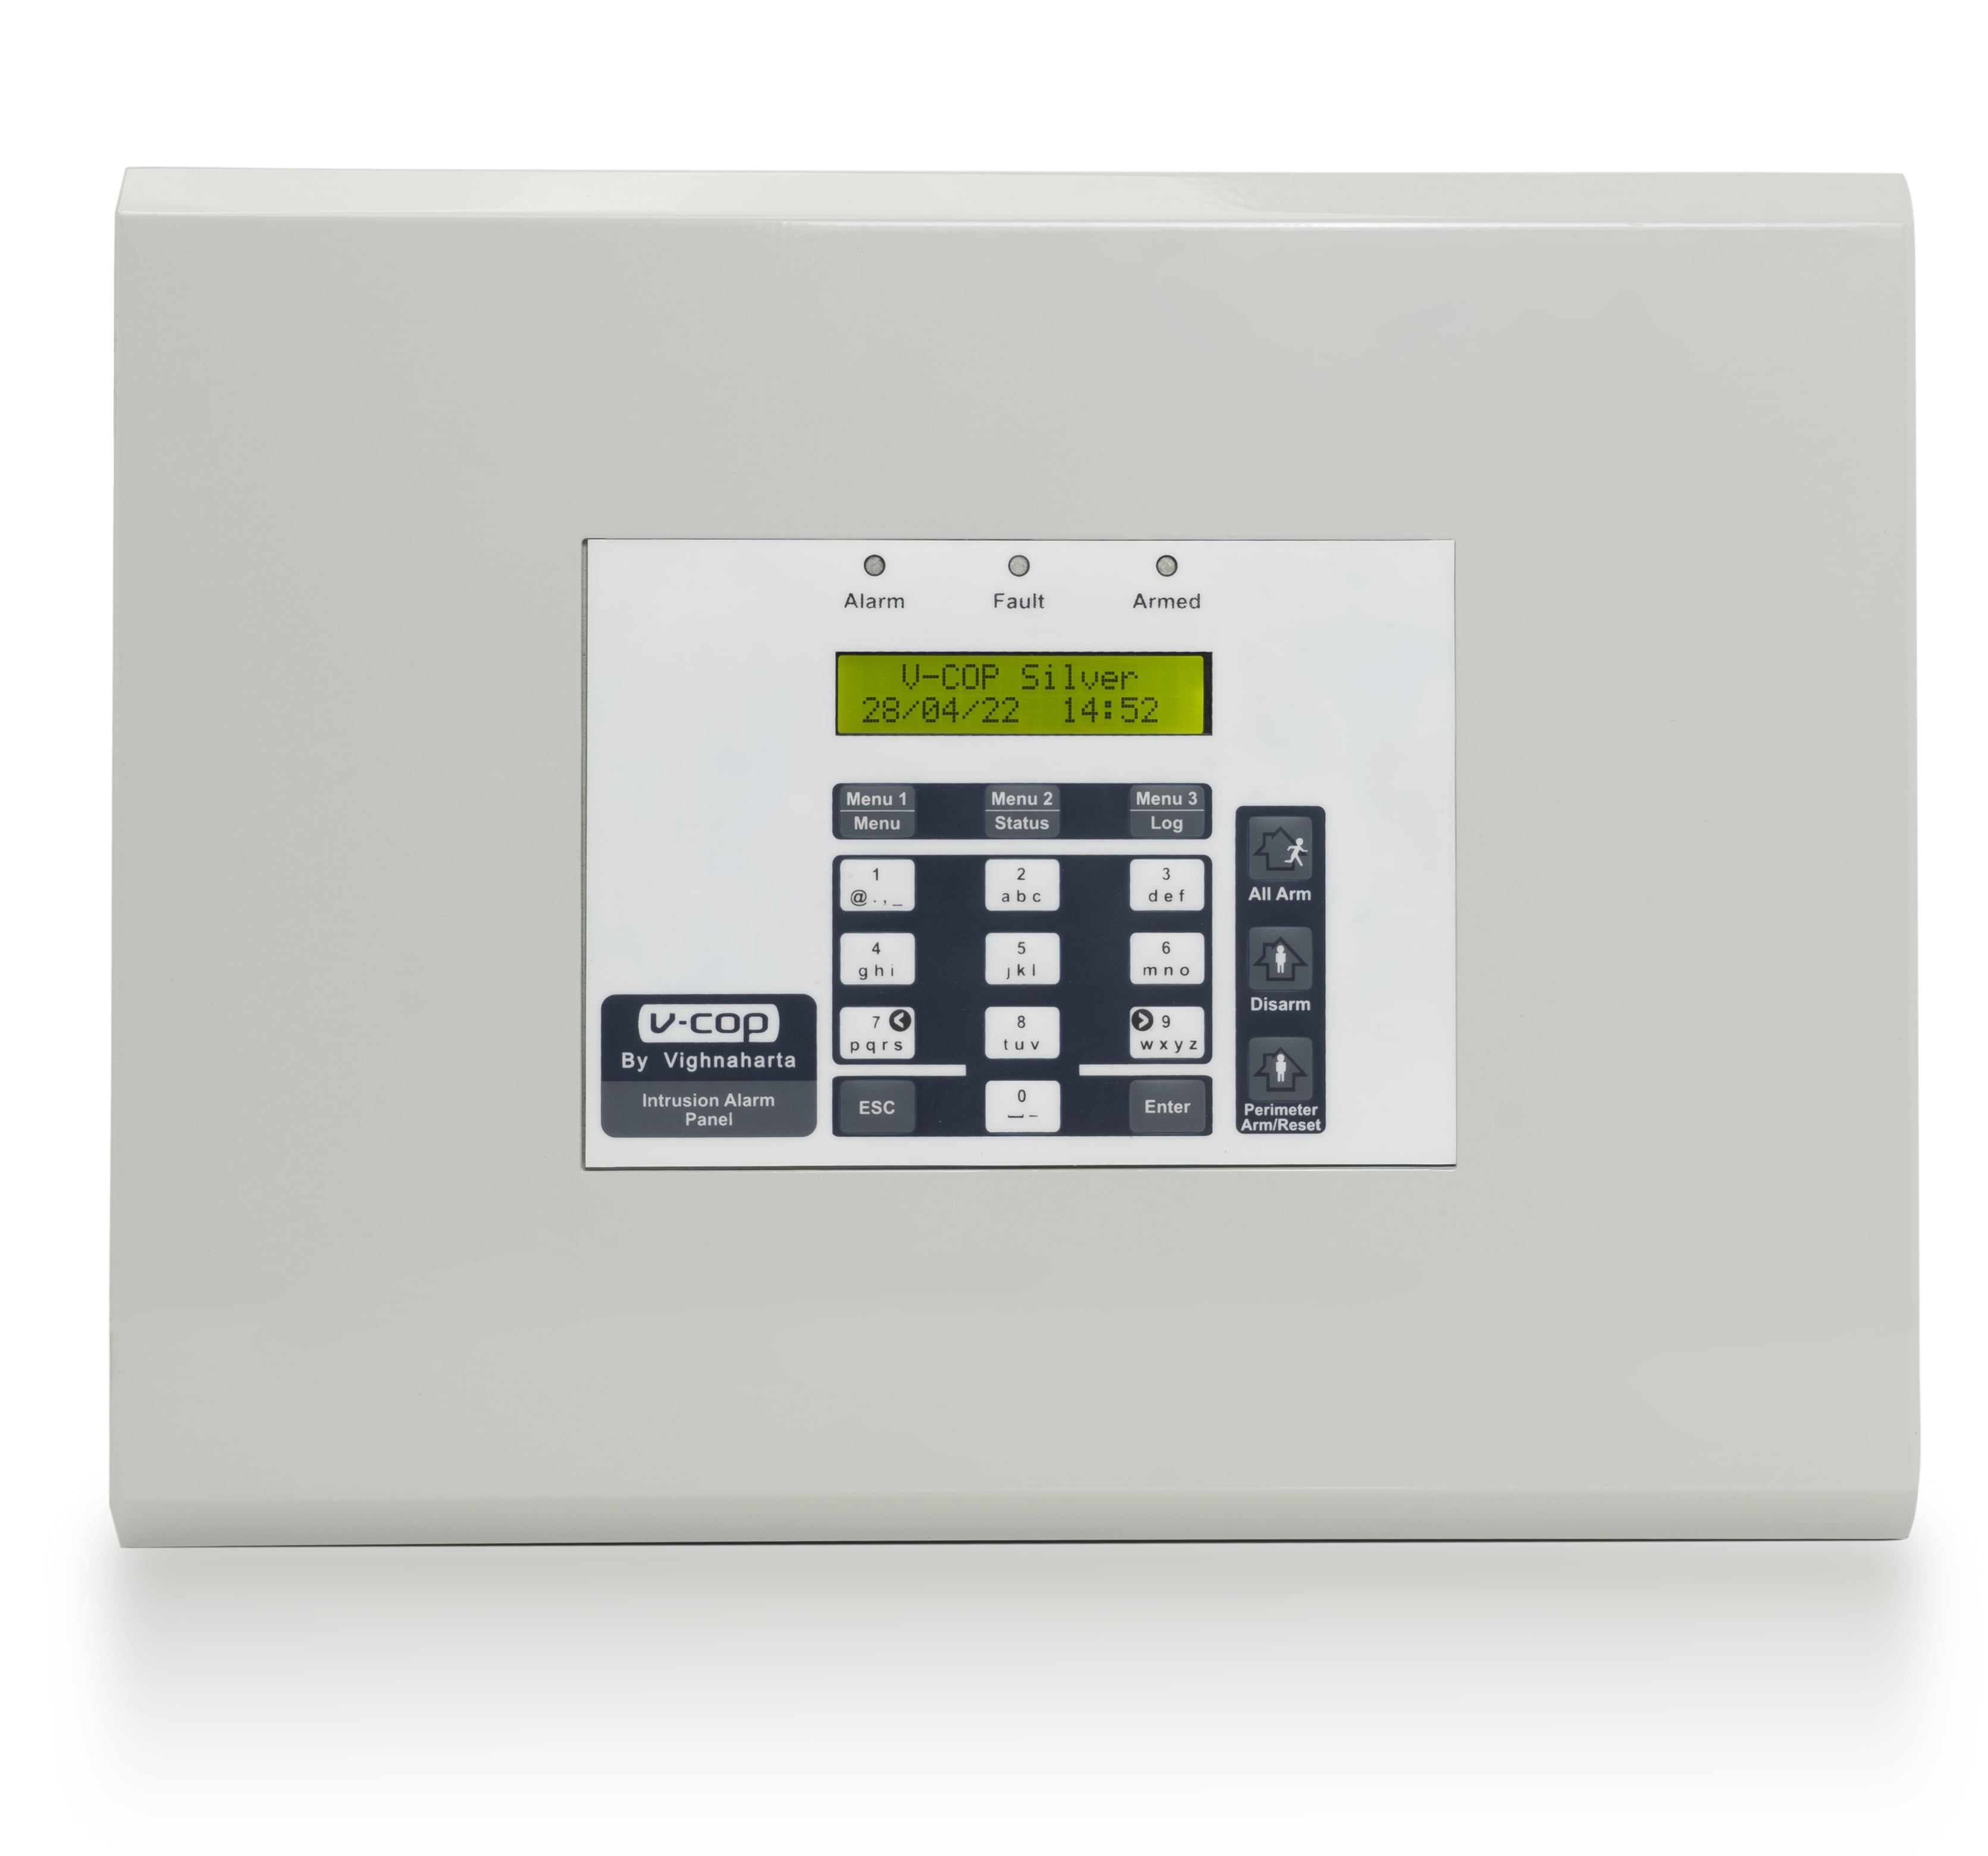 V-Cop Gold - IP Wired Panel
Intrusion Alarm System